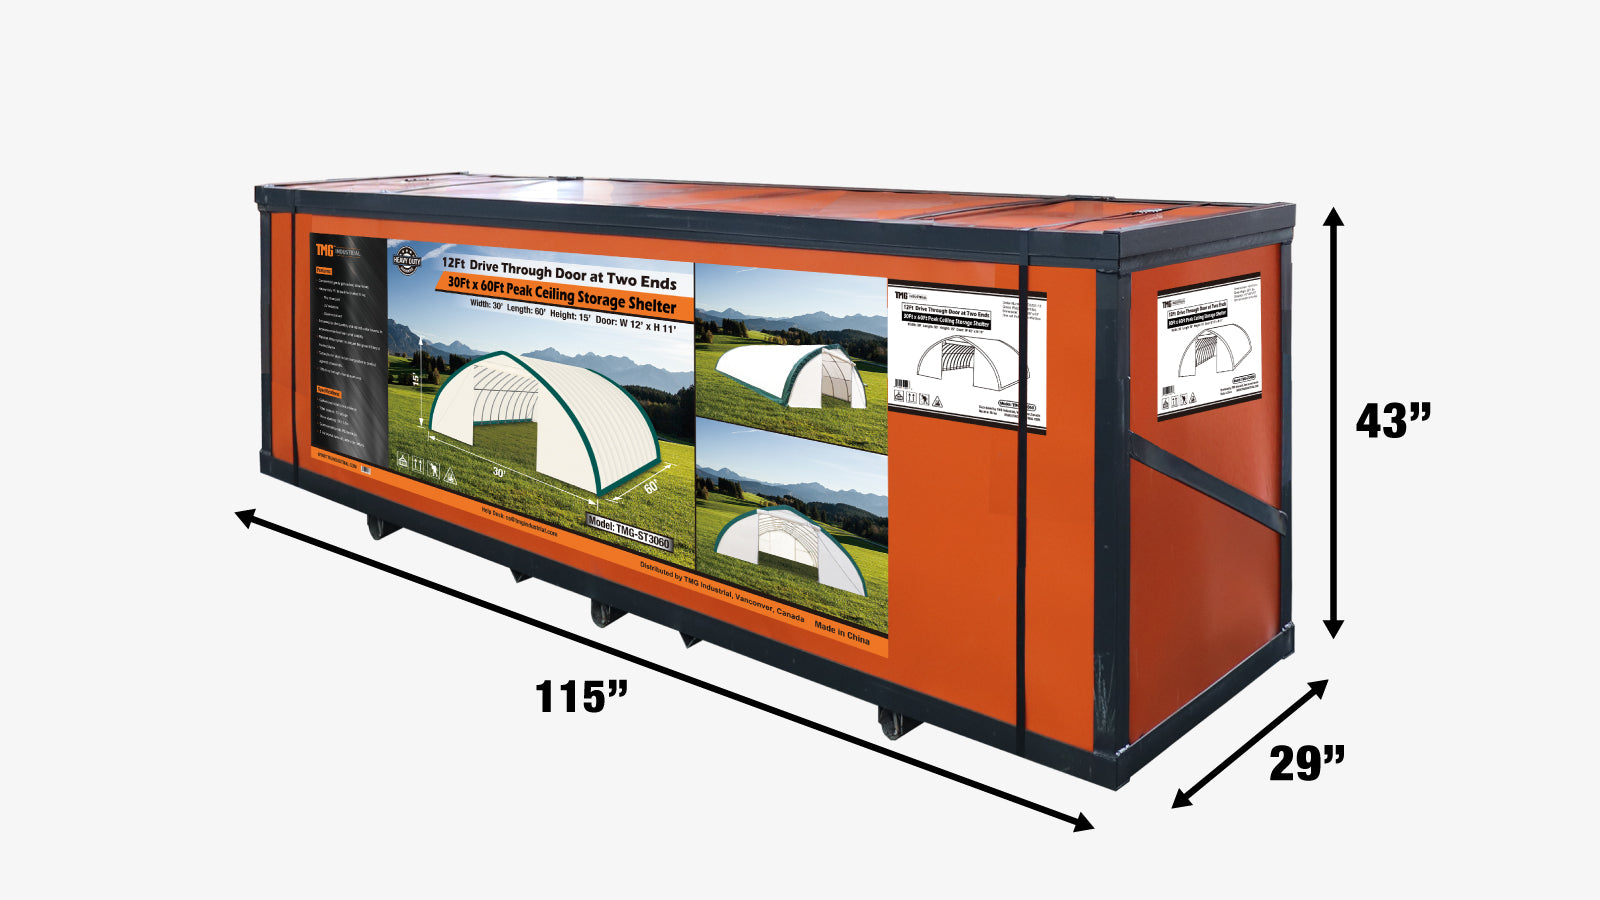 TMG Industrial 30' x 60' Peak Ceiling Storage Shelter with Heavy Duty 11 oz PE Cover & Drive Through Doors, TMG-ST3060E(Previously ST3060)-shipping-info-image